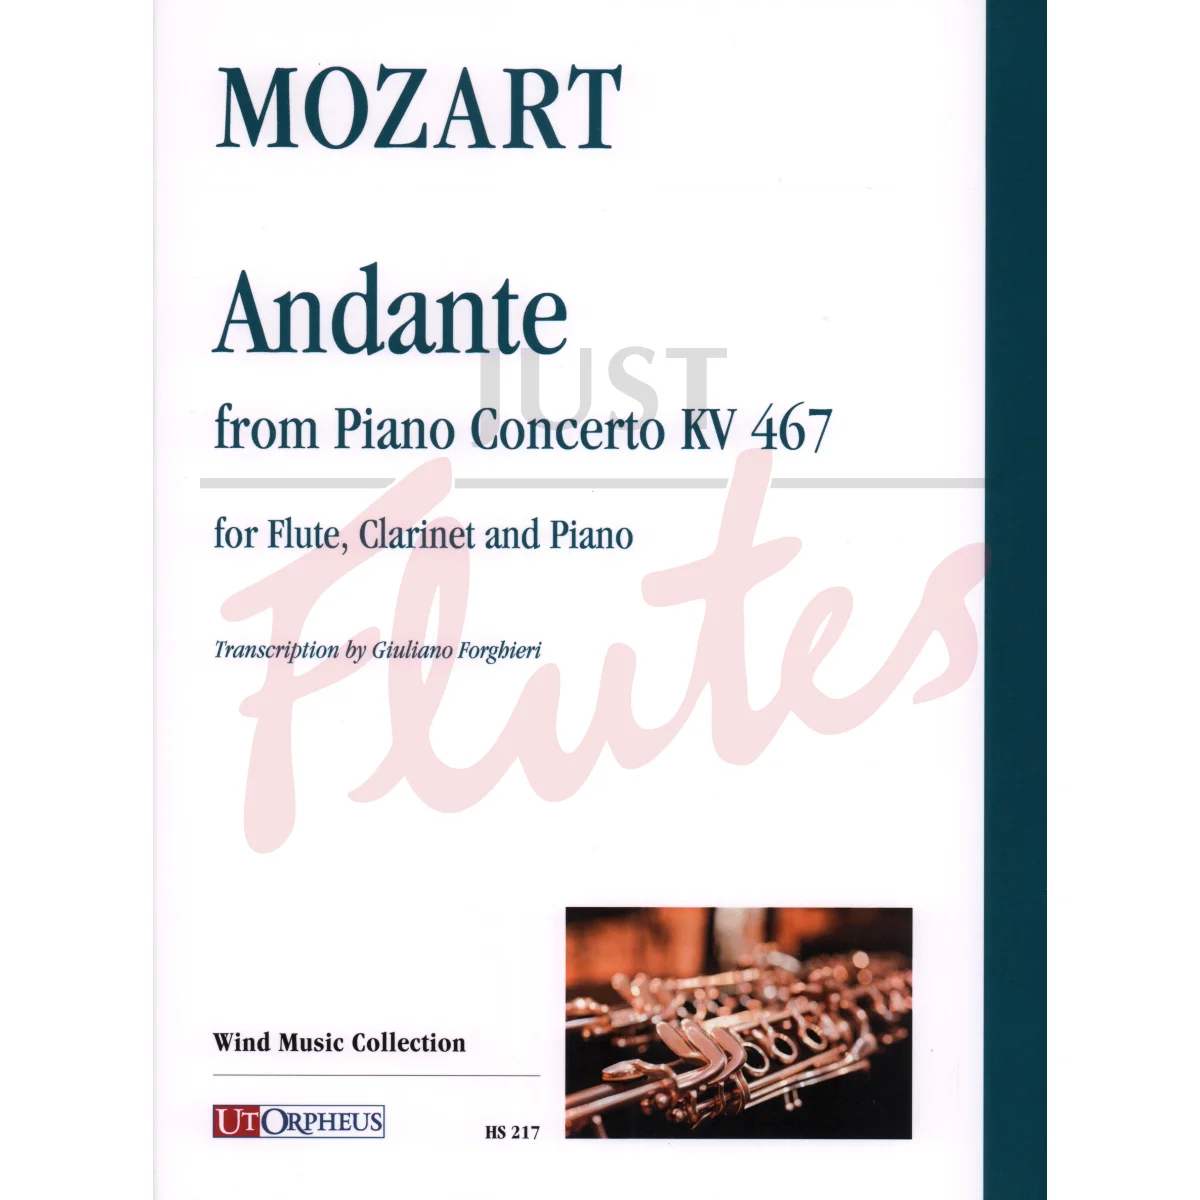 Andante from Piano Concerto for Flute, Clarinet and Piano